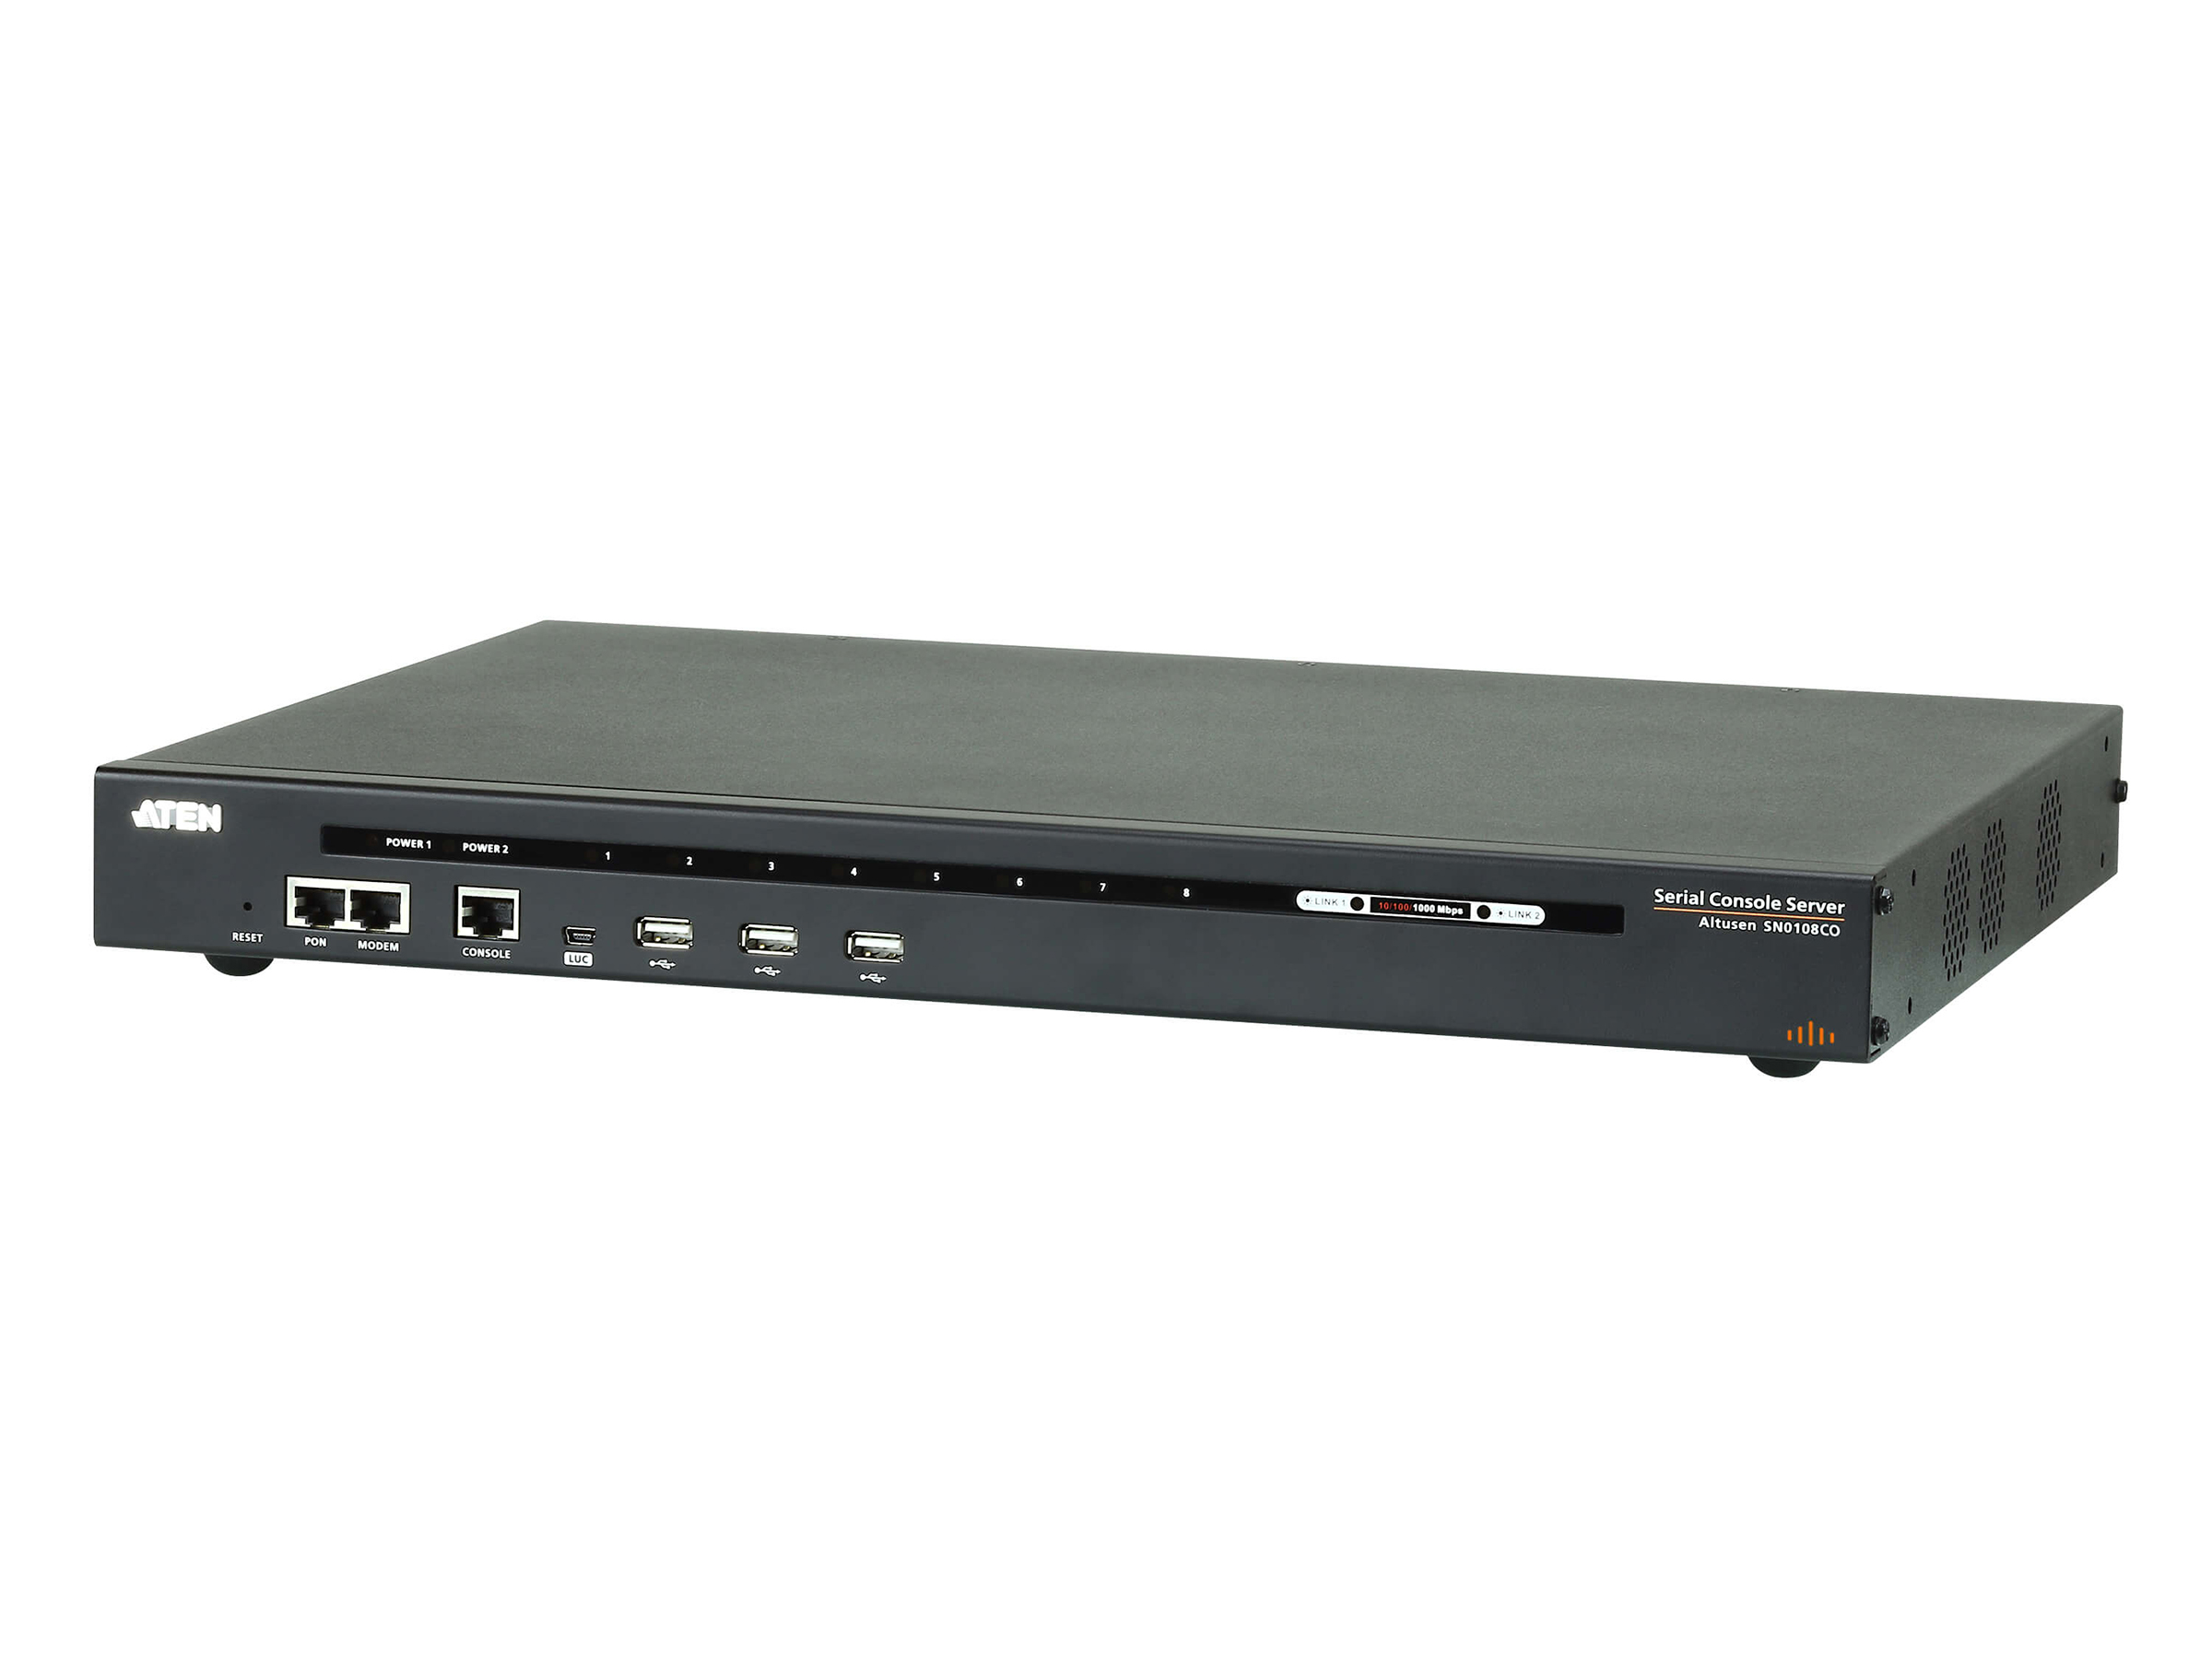 Aten SN0108CO 8-Port Serial Console Server with Dual Power/LAN